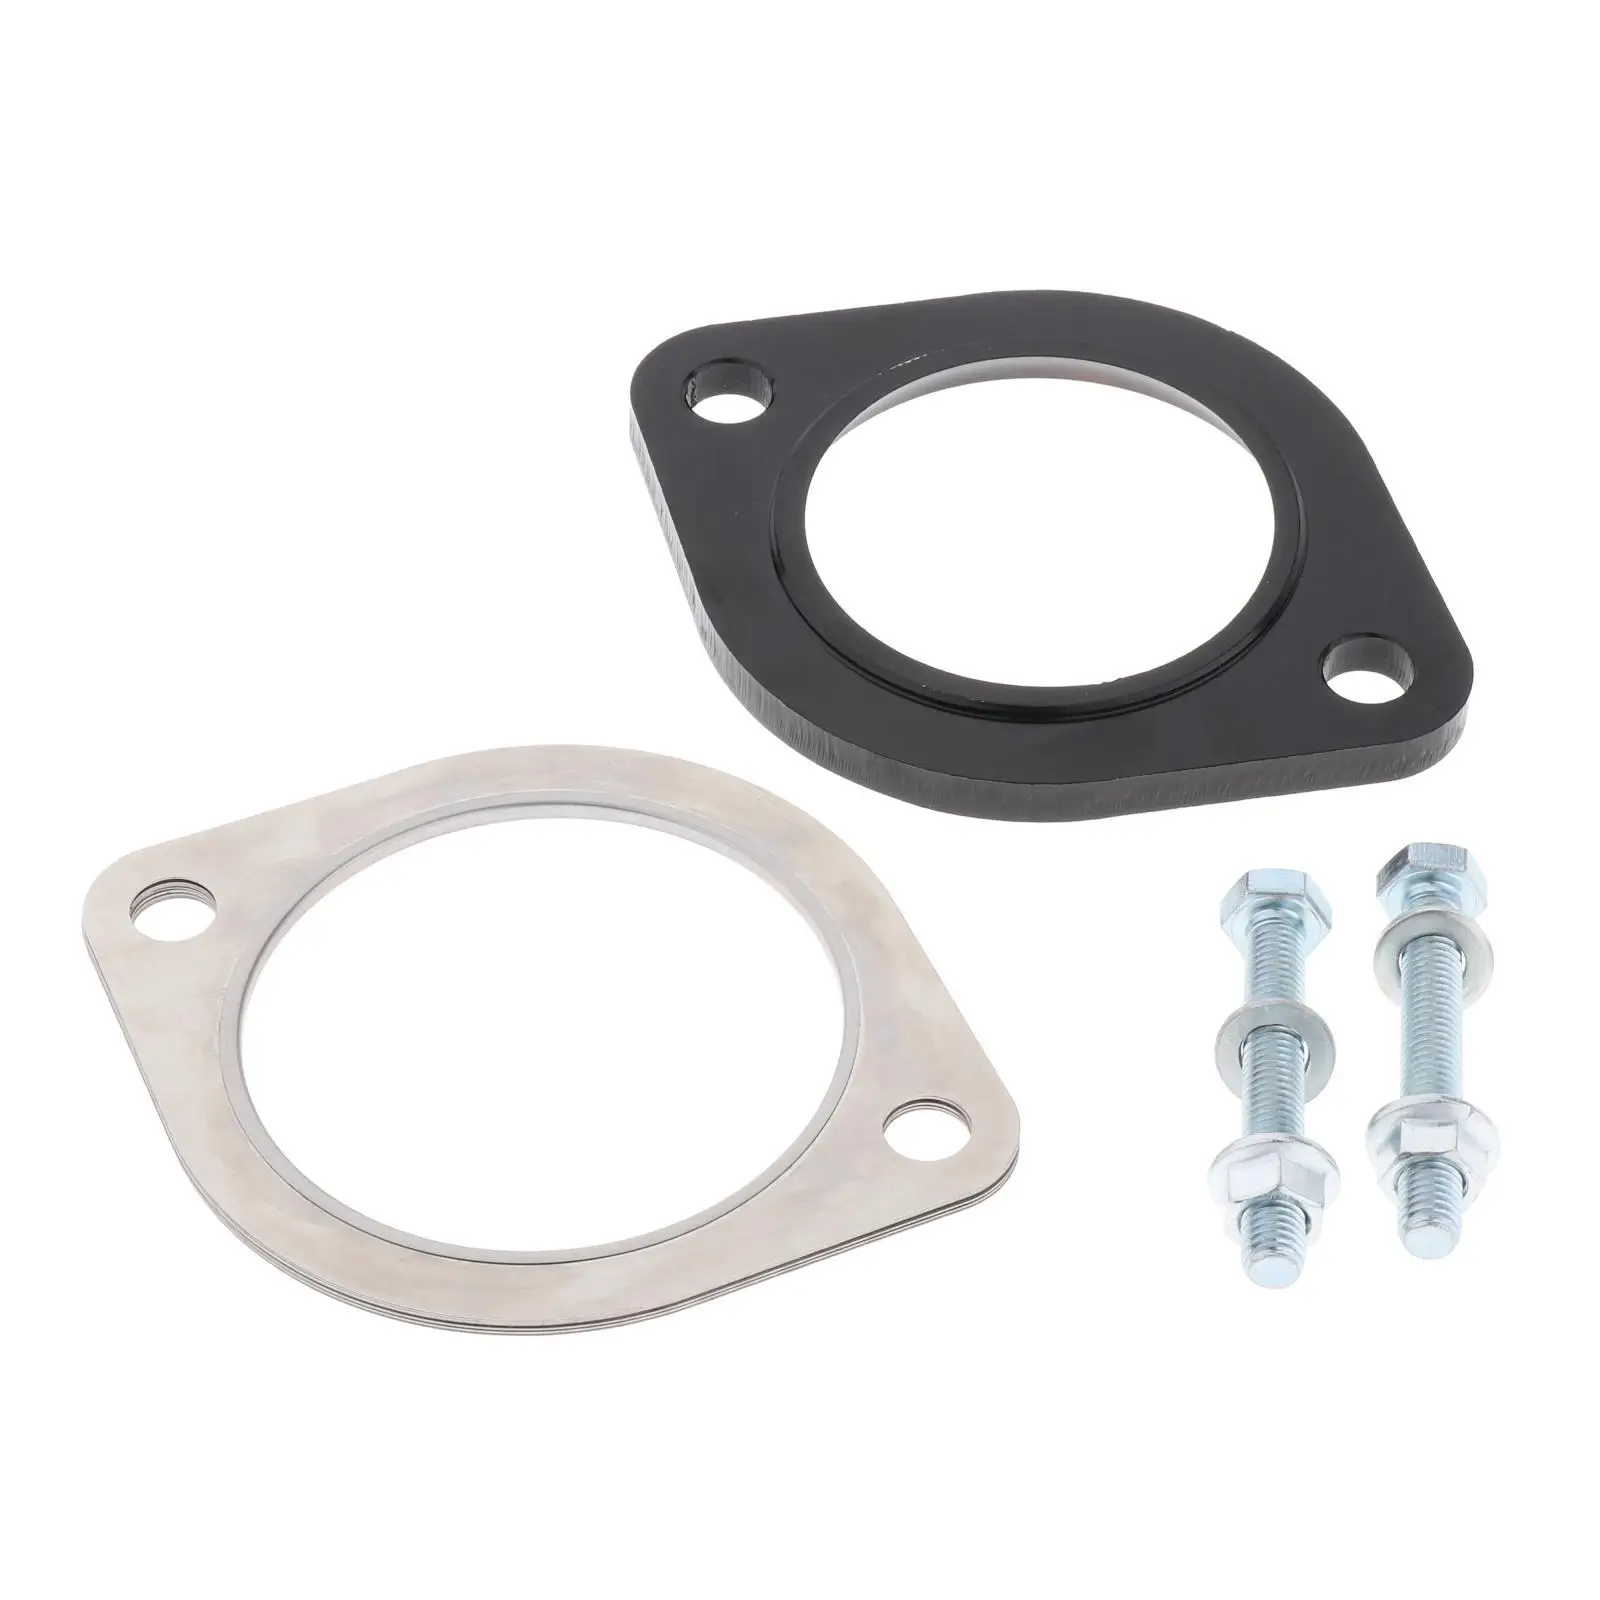 1 Set Exhaust Adapter 077046 129mm Steel Downpipe Adapter Automotive Exhaust Emissions 2-Bolt Gasket Flange Parts Replacement